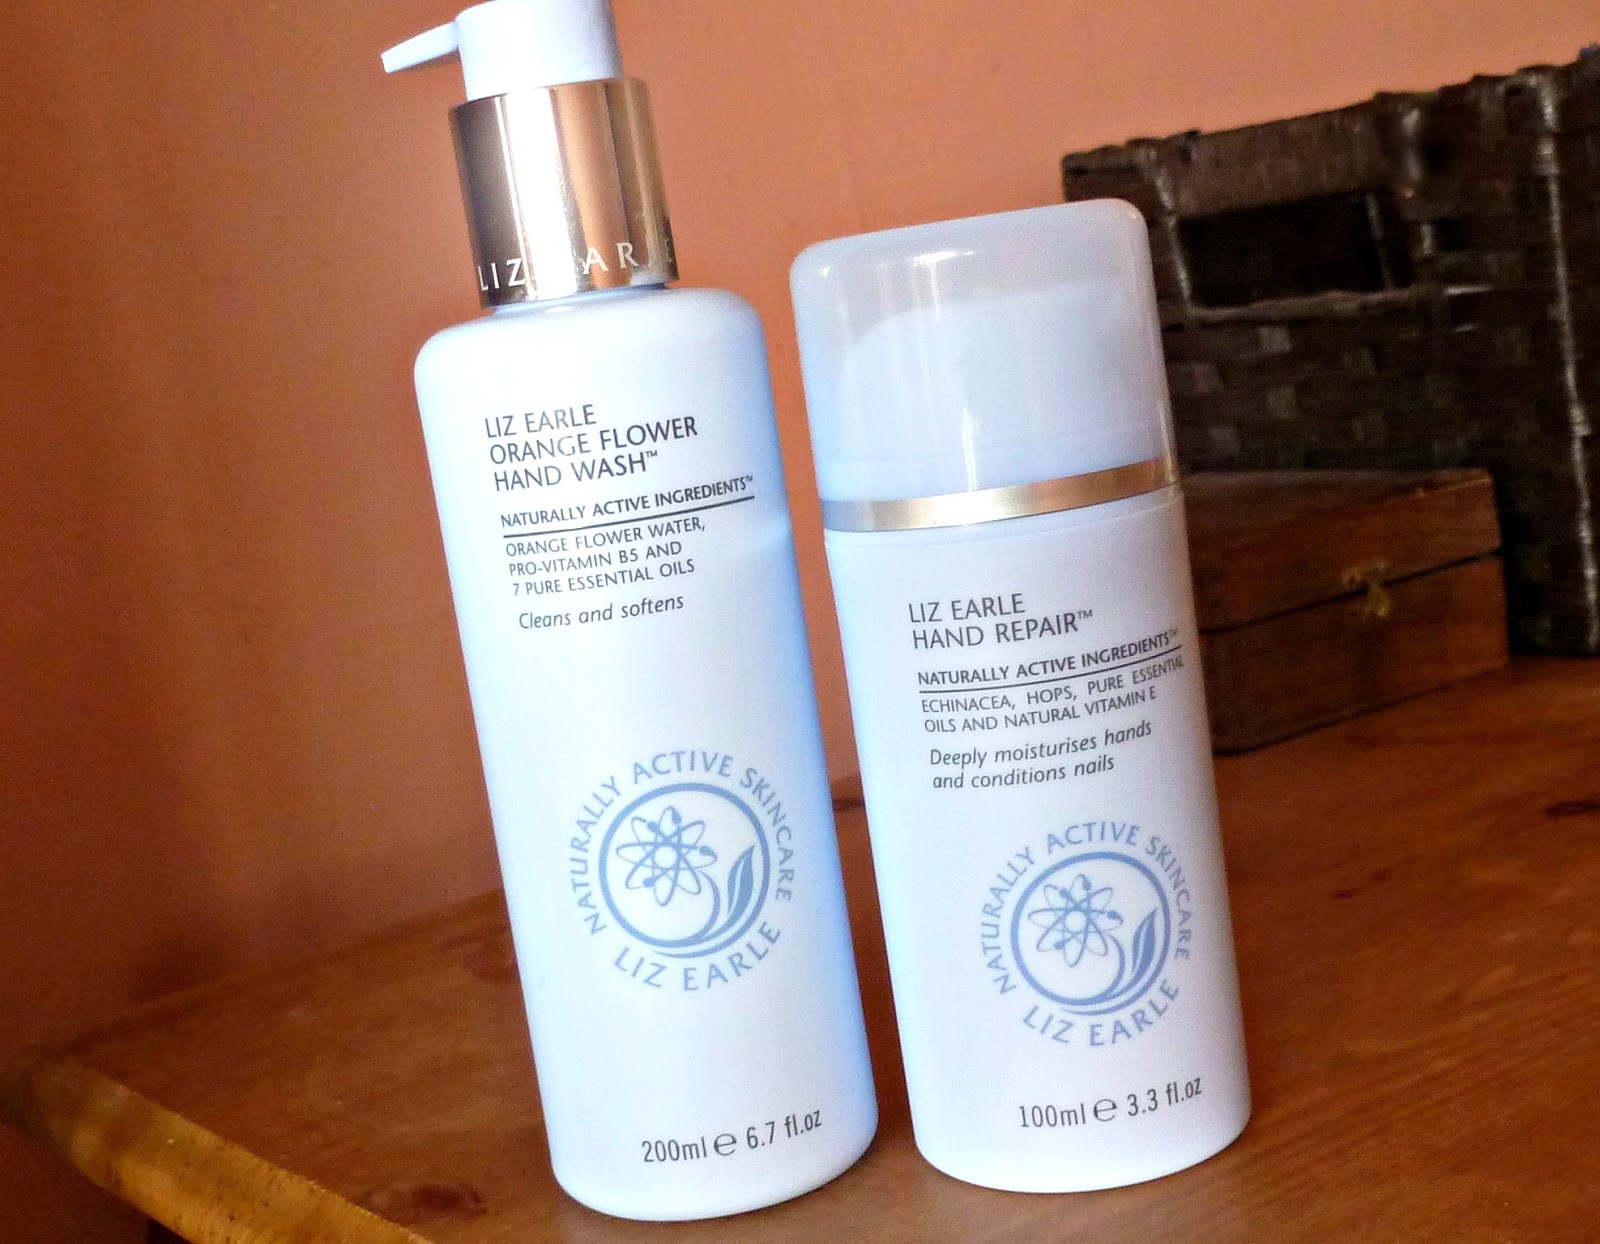 A picture of Liz Earle Orange Flower Hand Wash and  Liz Earle Hand Repair